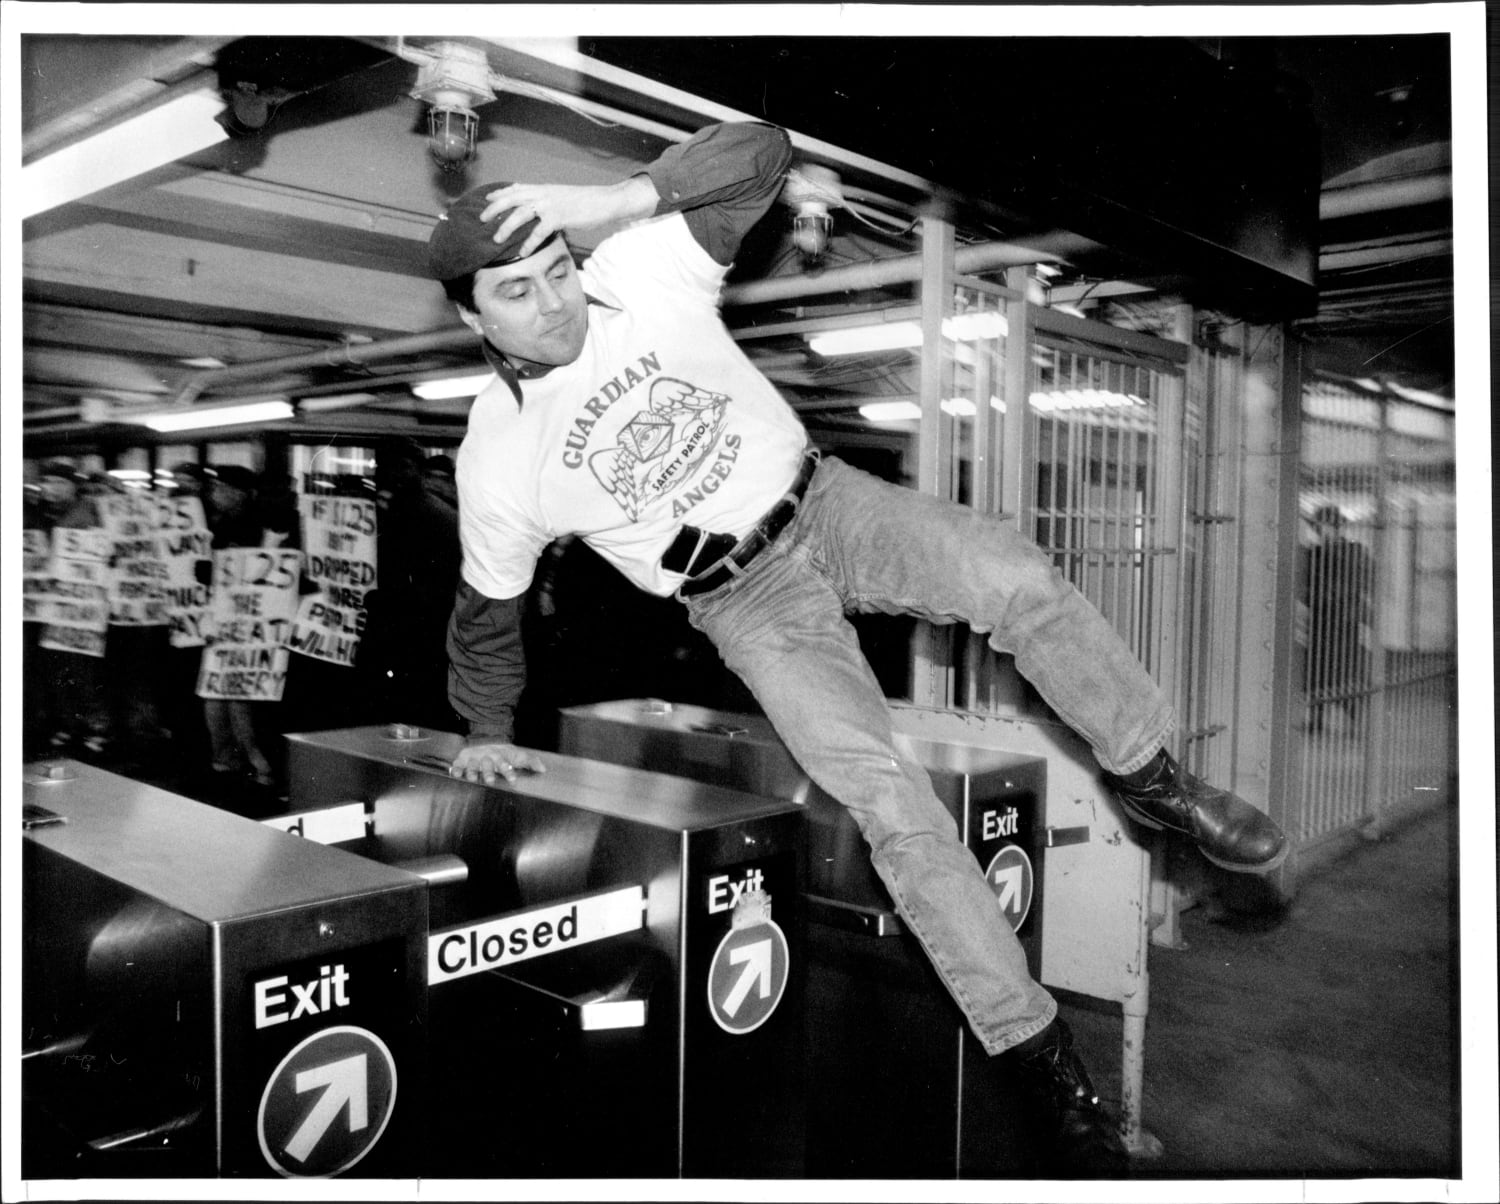 Curtis Sliwa, founder of the Guardian Angels vigilante group, jumps over a turnstile to protest an increase in subway fare (New York City, 1991)